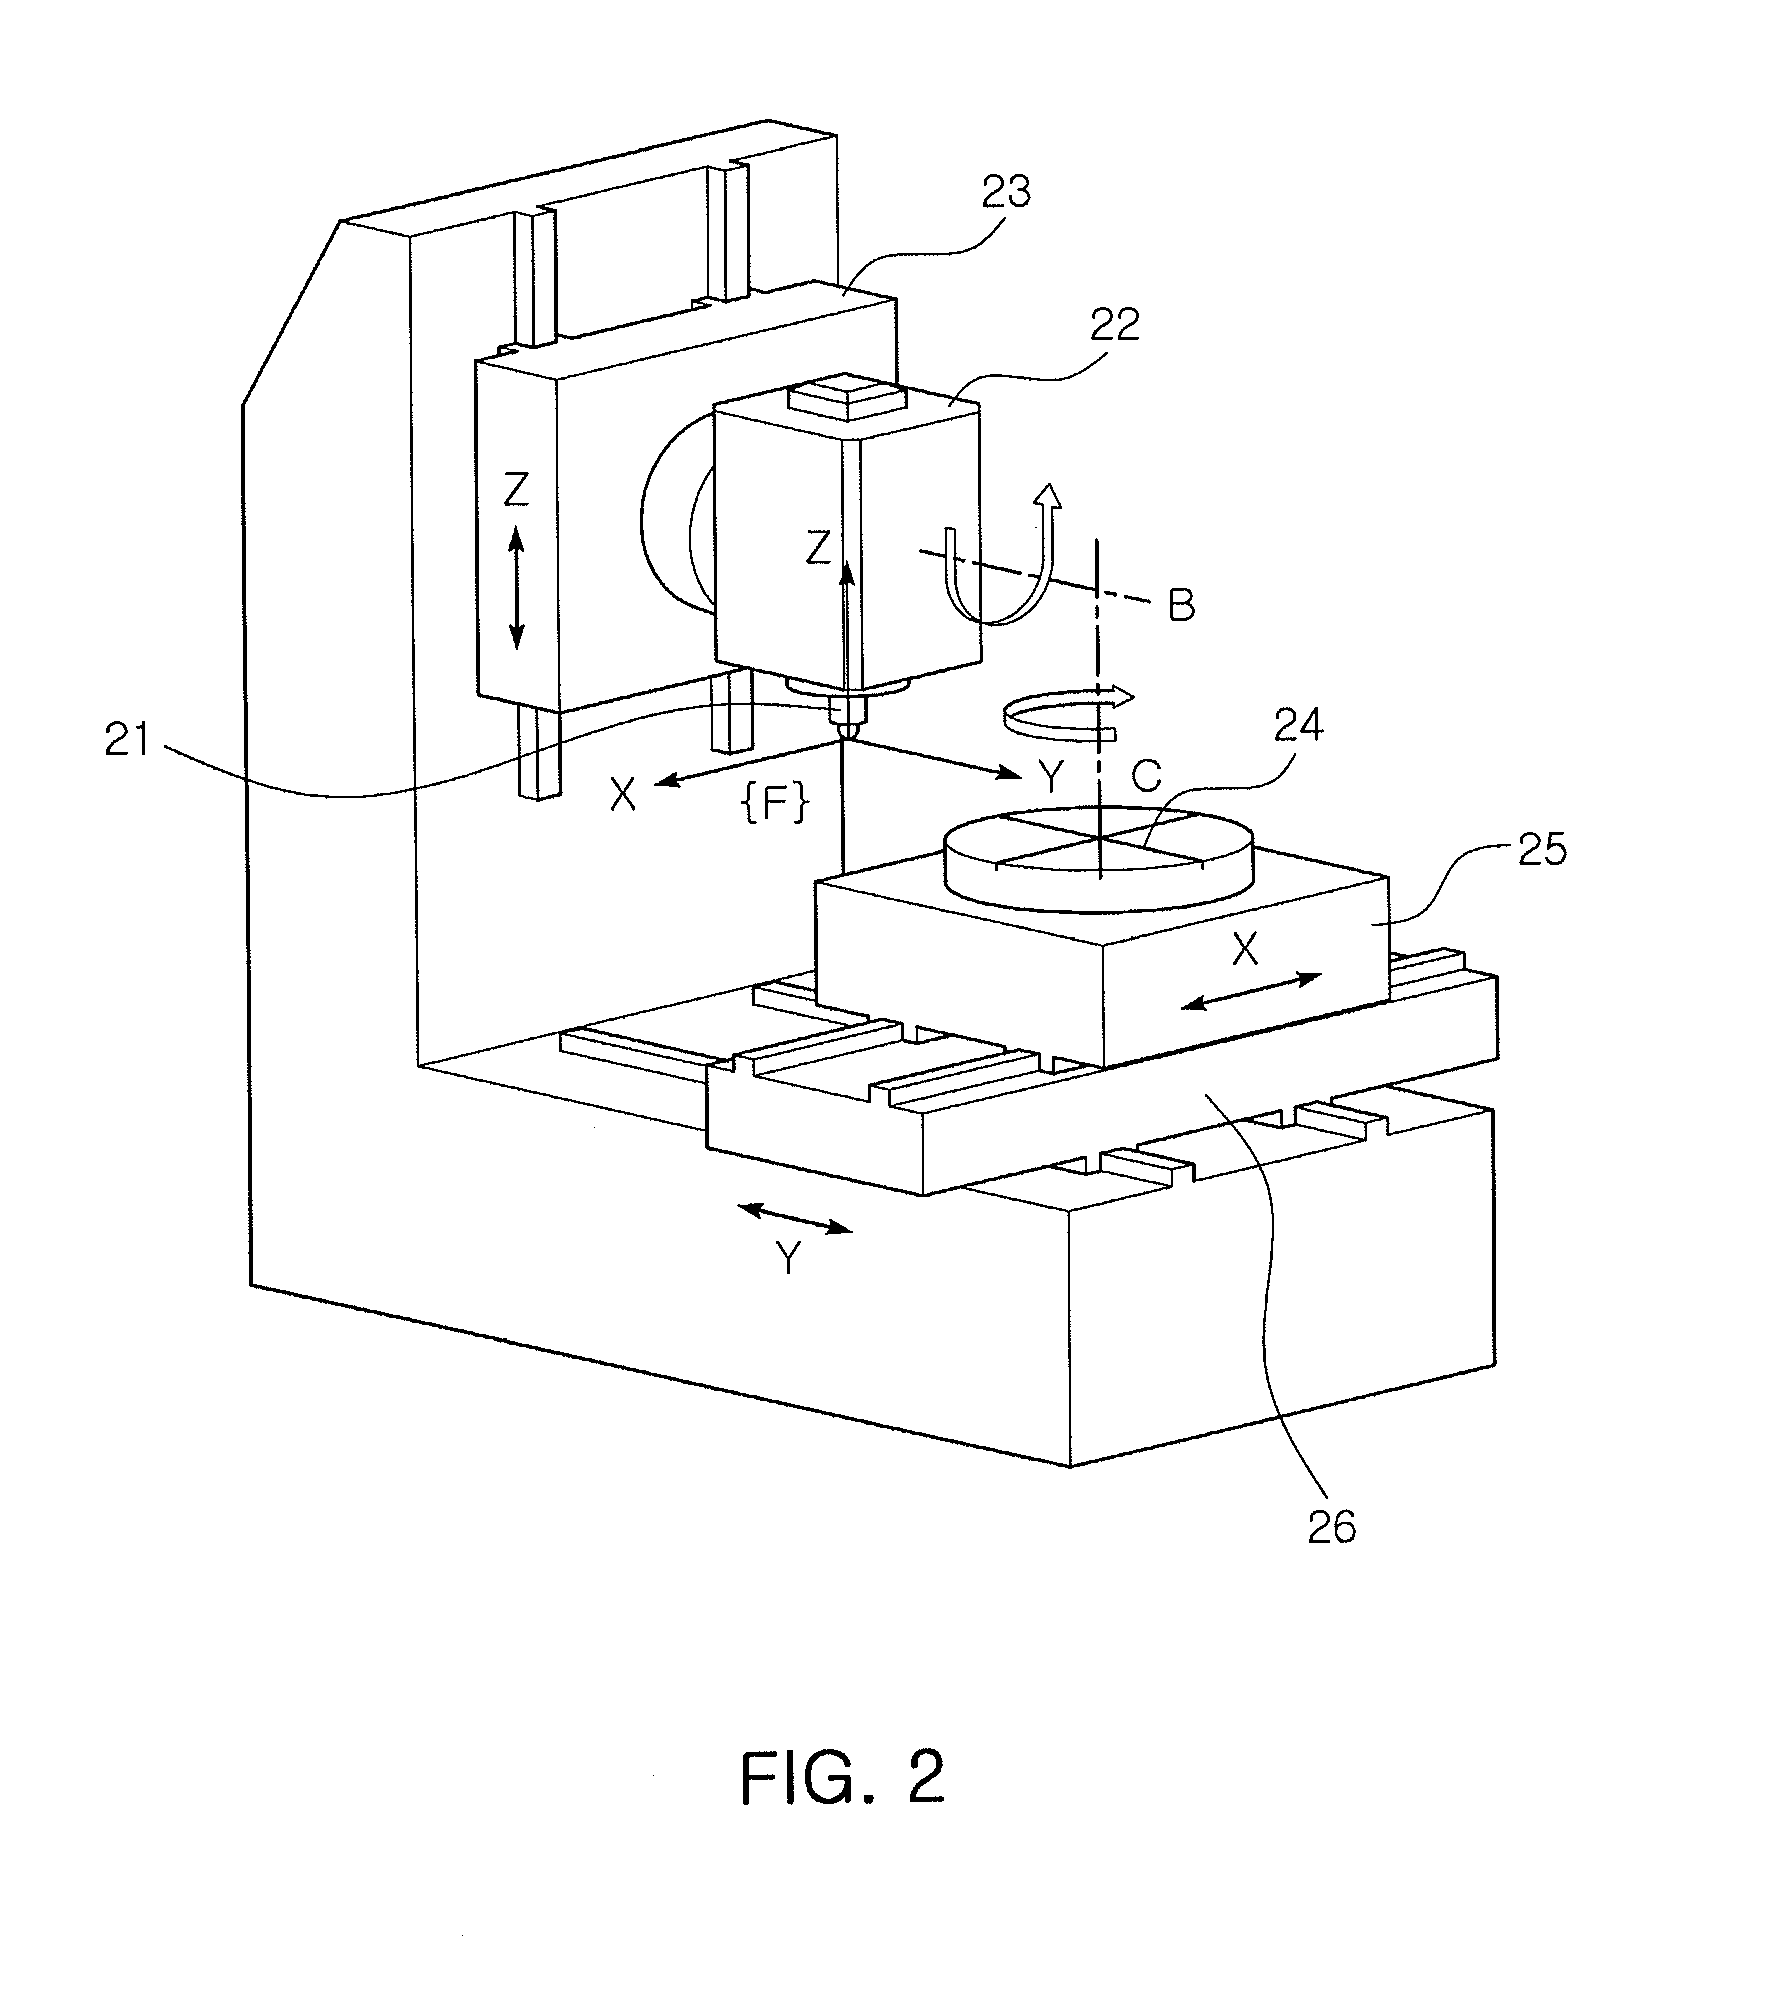 Method for Estimating Geometric Error Between Linear Axis and Rotary Axis in a Multi-Axis Machine Tool